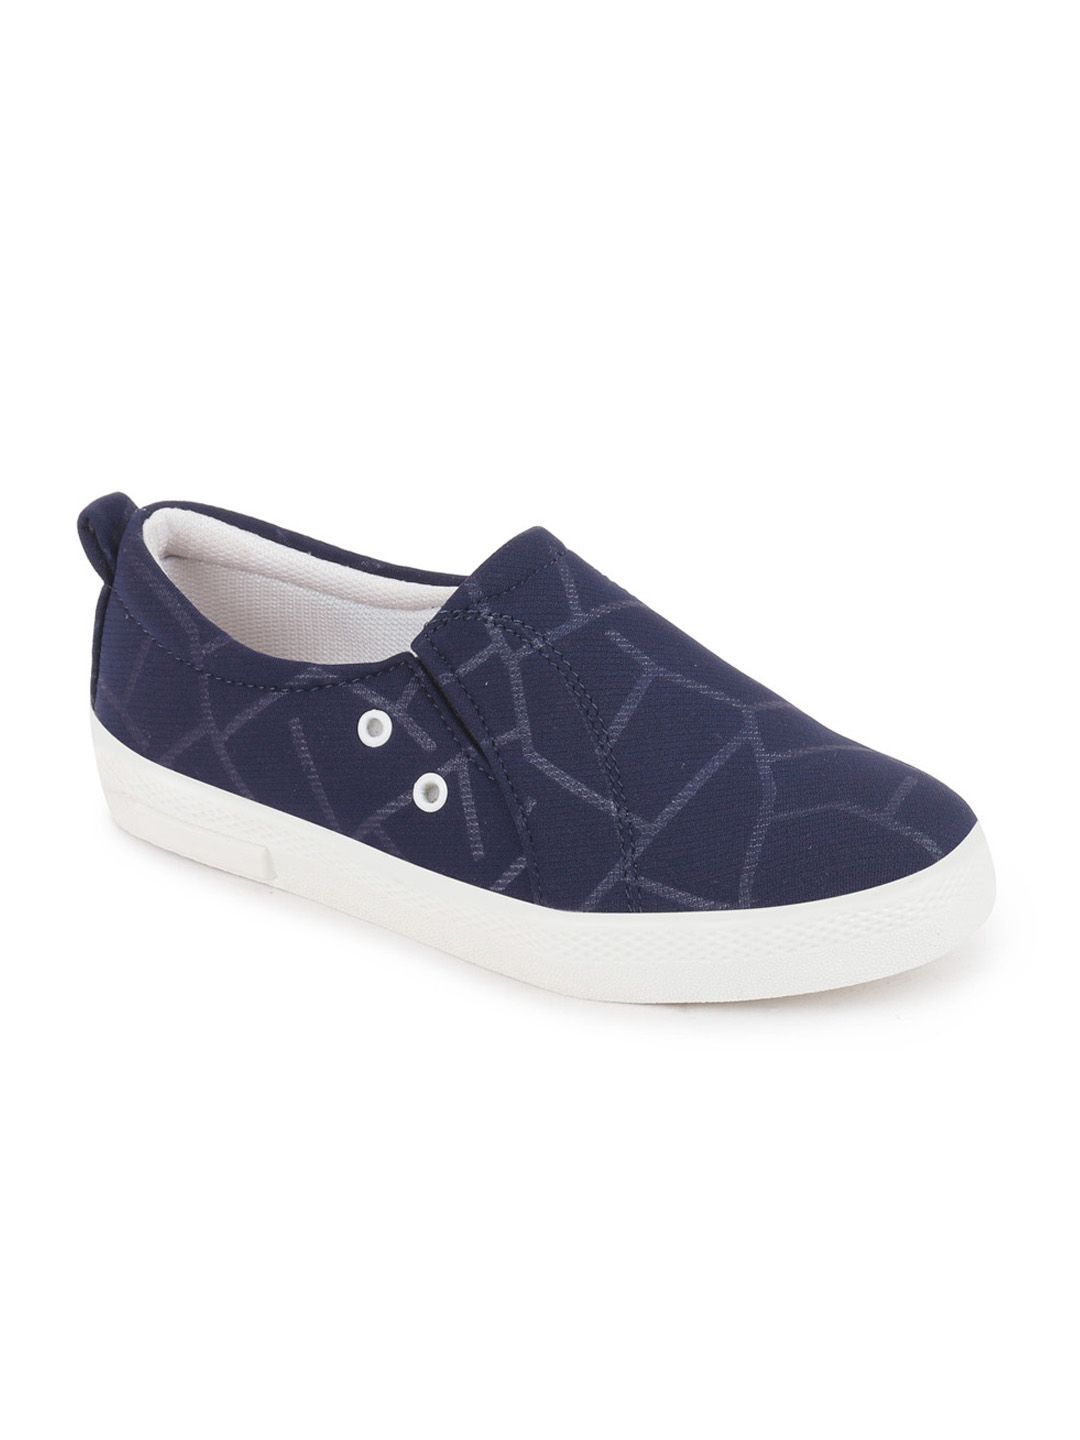 FAUSTO Women Navy Blue Slip-On Sneakers Price in India